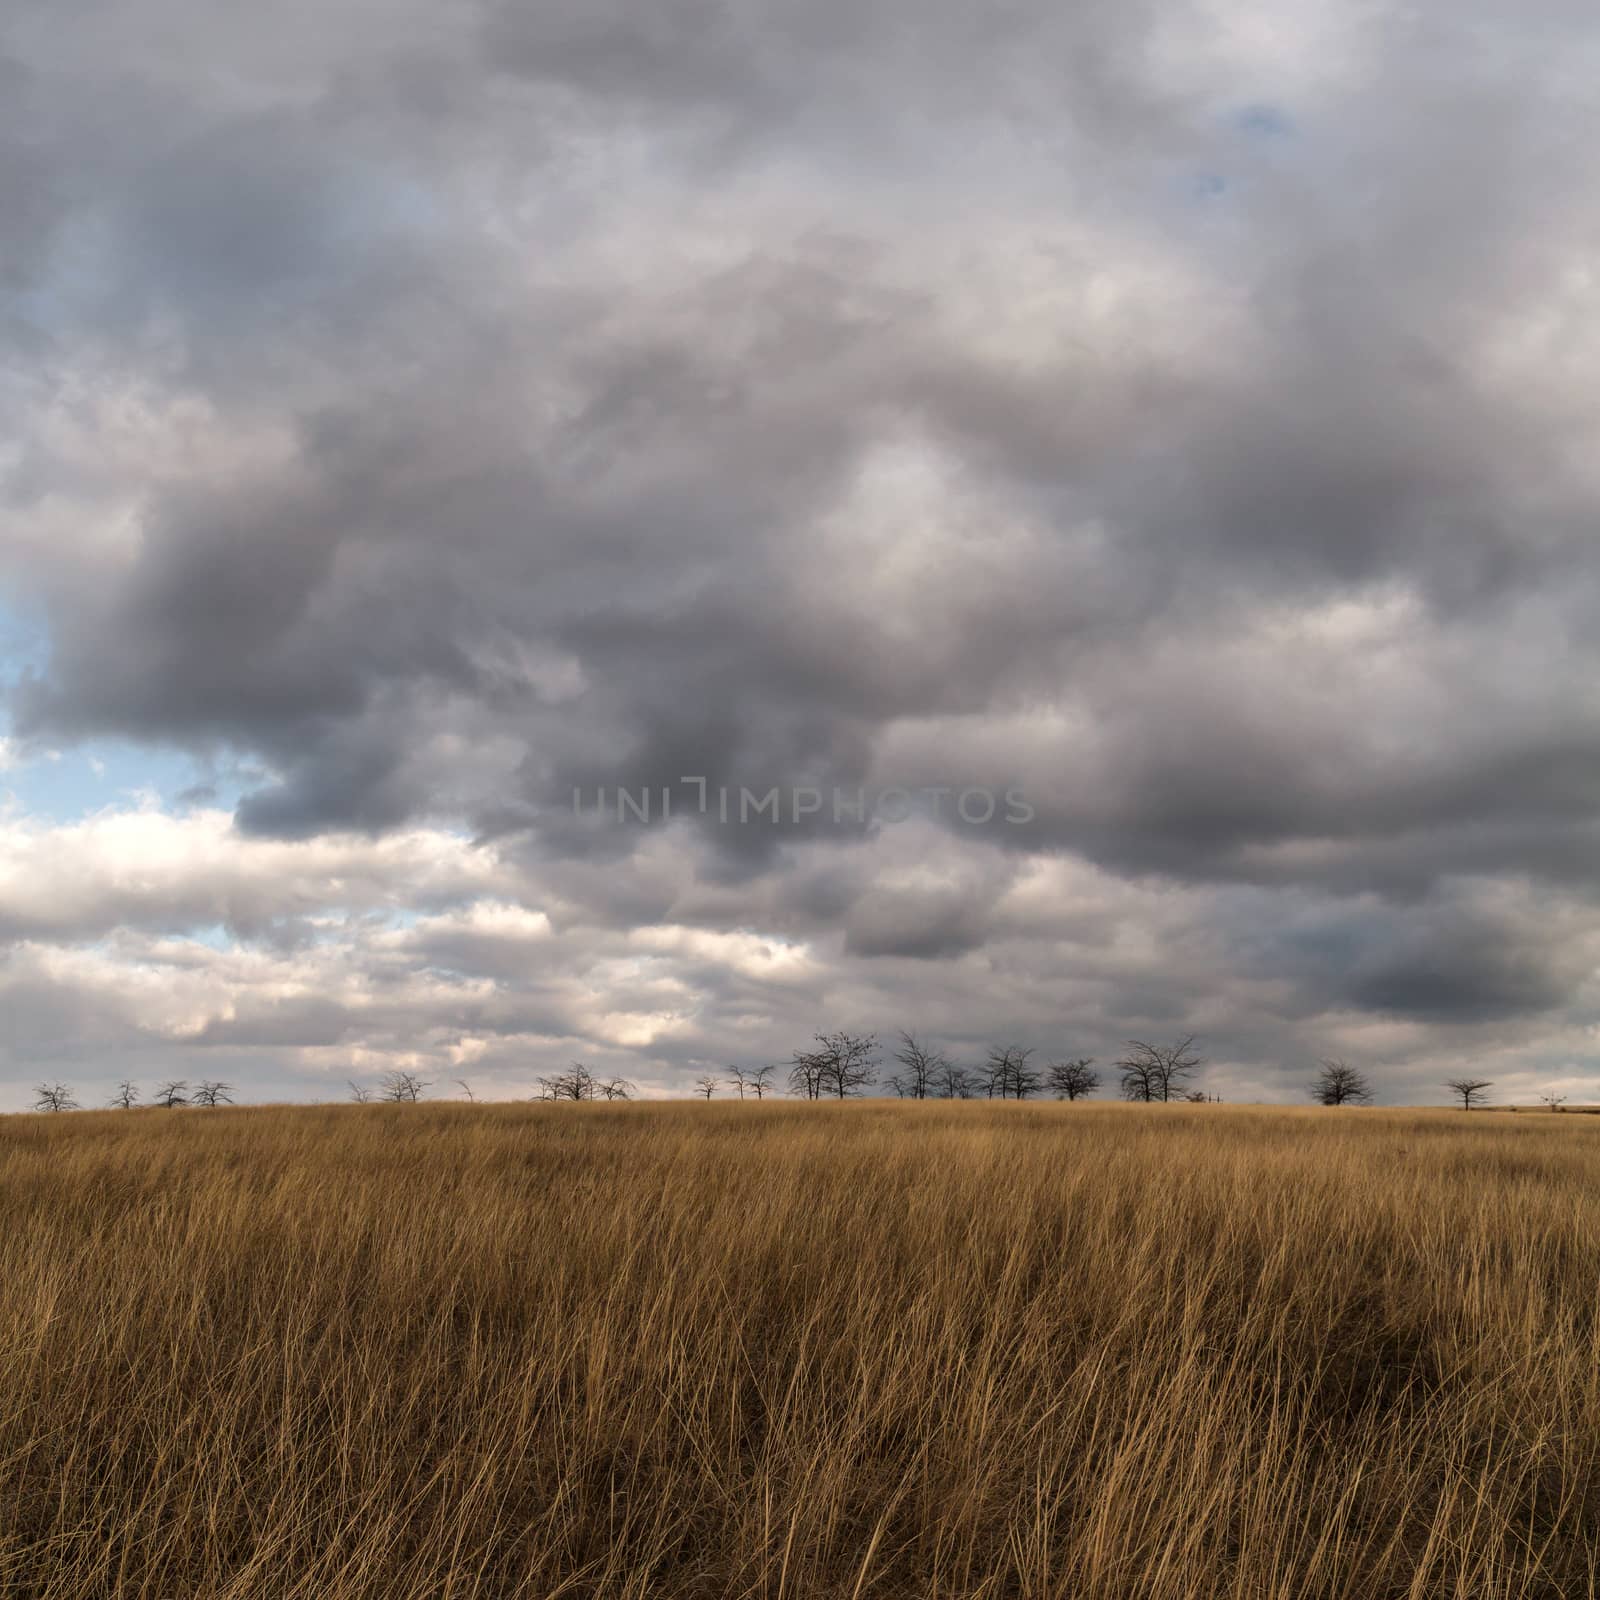 prairie grass on the background of a stormy sky